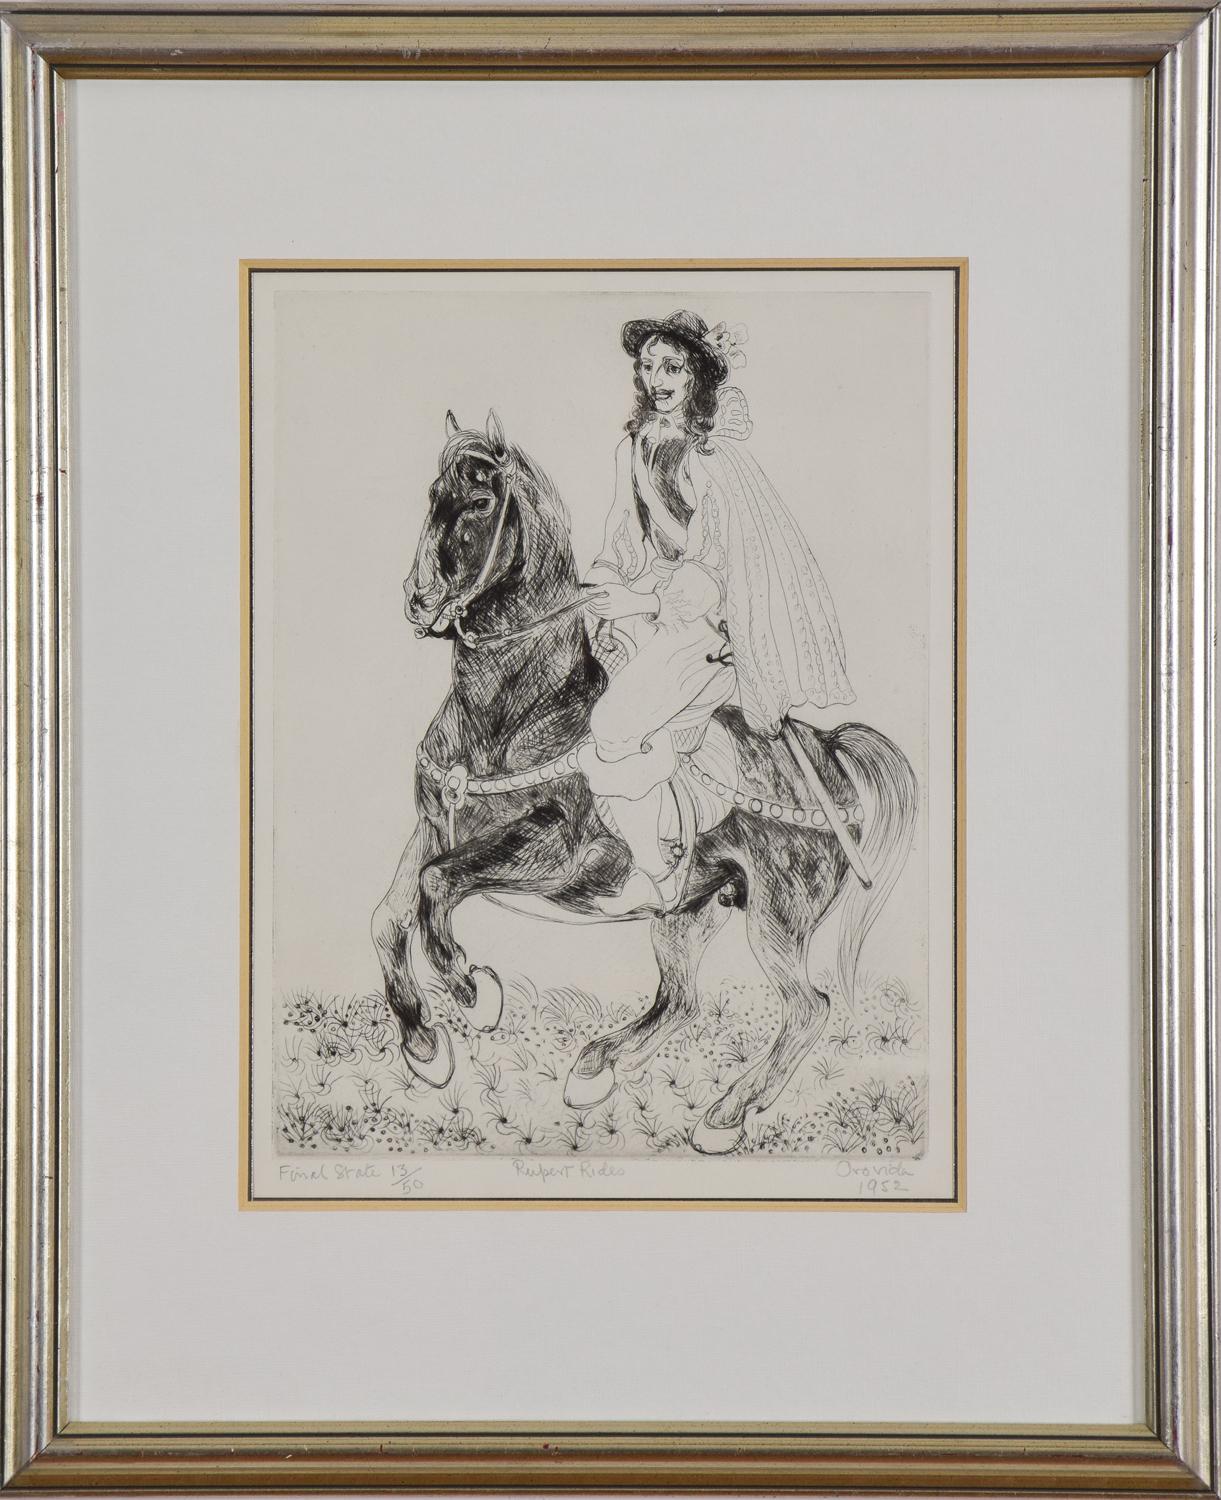 *UK BUYERS WILL PAY AN ADDITIONAL 20% VAT ON TOP OF THE ABOVE PRICE

Rupert Rides by Orovida Pissarro (1893-1968)
Etching
31 x 23.5 cm (12 ¼ x 9 ¼ inches)
Signed and dated lower right Orovida 1952
Inscribed final state 13/50 lower left and titled